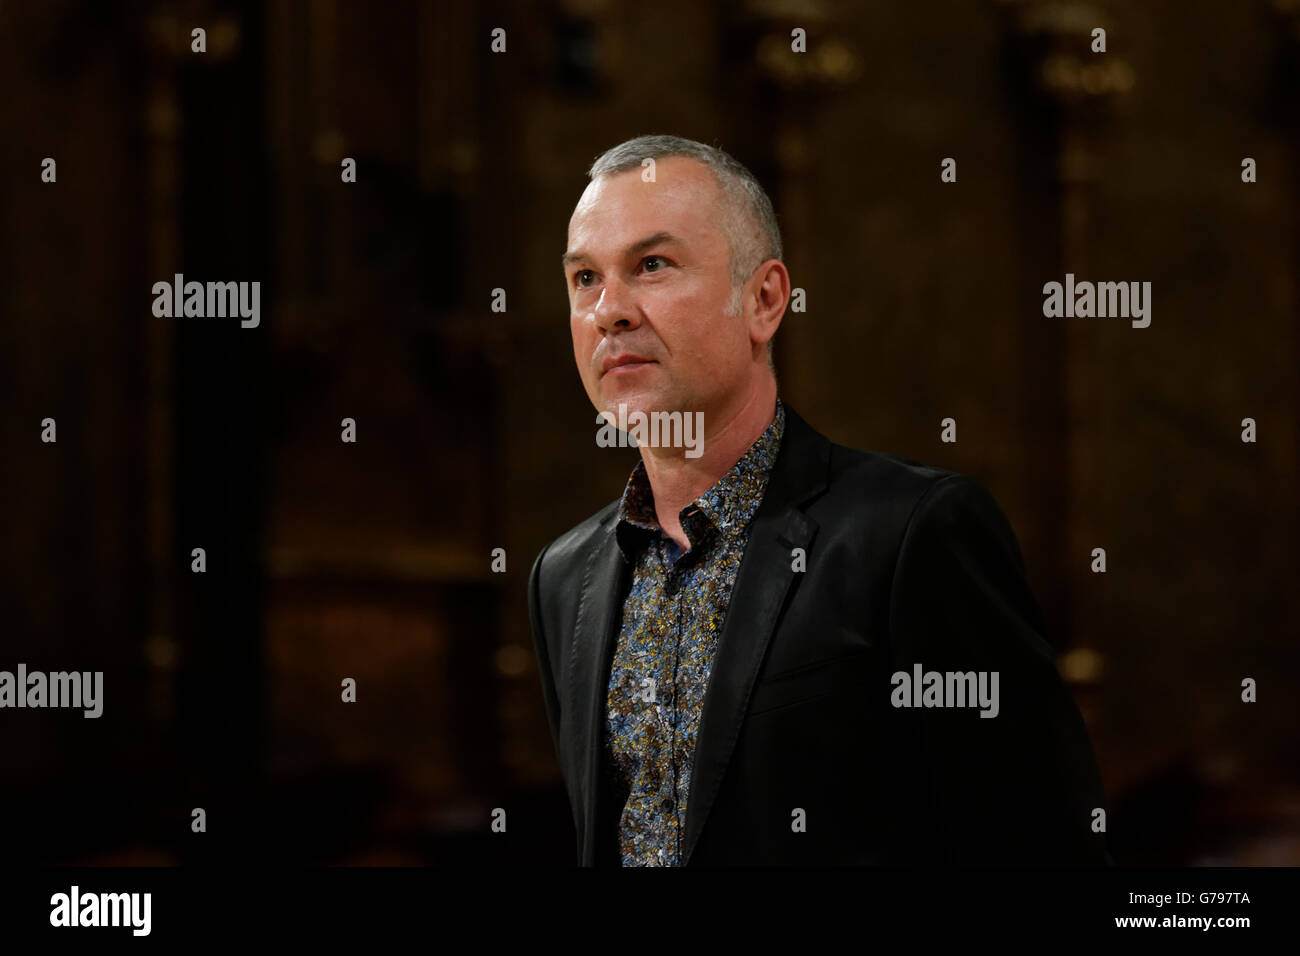 Montserrat, Barcelona, Spain. 25th June, 2016.The 6th international festival of the organ of Montserrat with Olivier Vernet, the organist of the cathedral of Monaco. Karl Burkhof/Alamy Live News Stock Photo